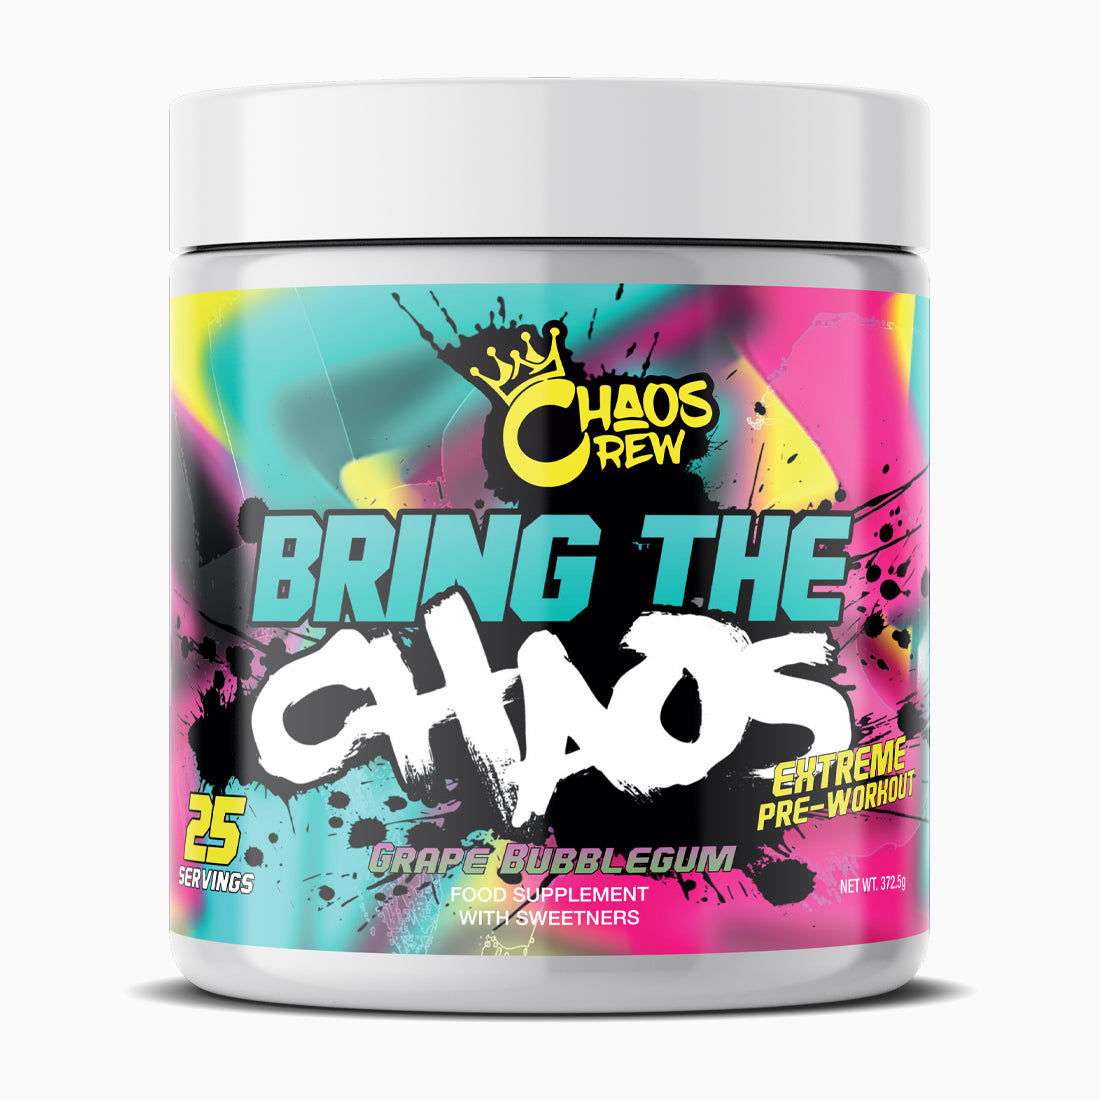 Chaos Crew - Bring The Chaos - Stim Pre-Workout 372.5g - 25 Servings (PLUS FREE CHAOS CREW SHAKER!!)